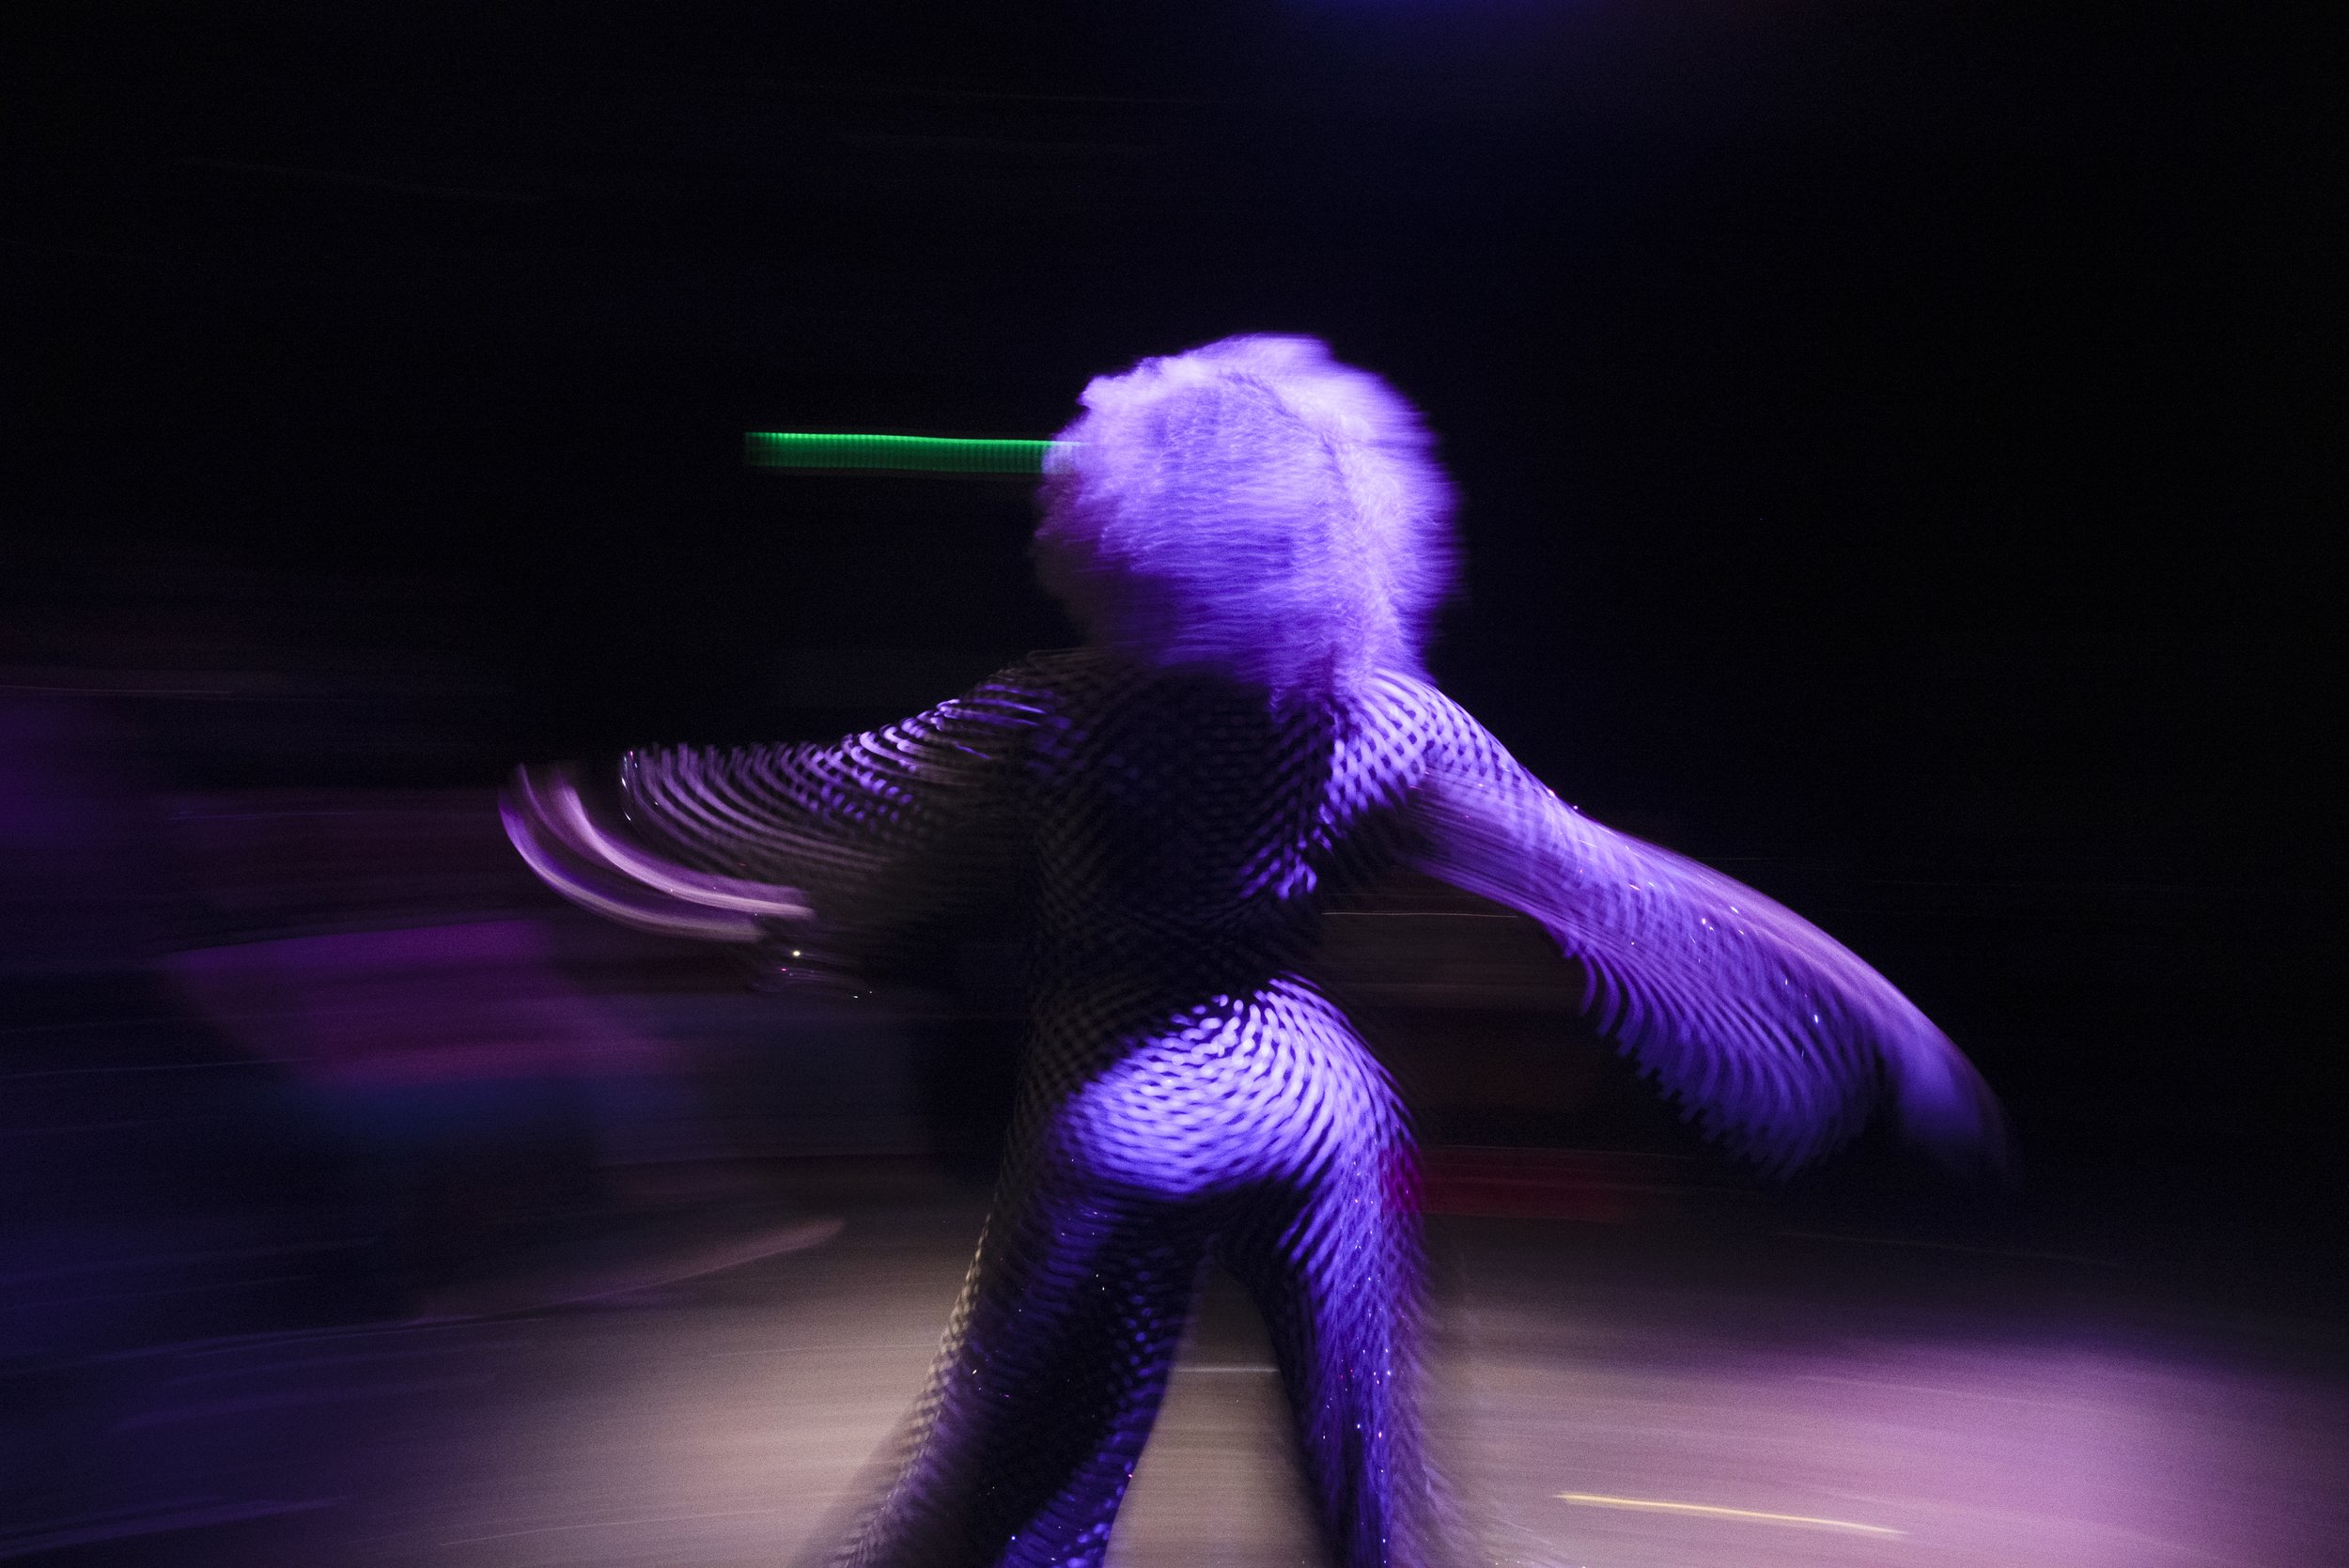  Rhealistic performs during a drag show at Wunderbar in Syracuse, New York on Sunday, September 19, 2021.  